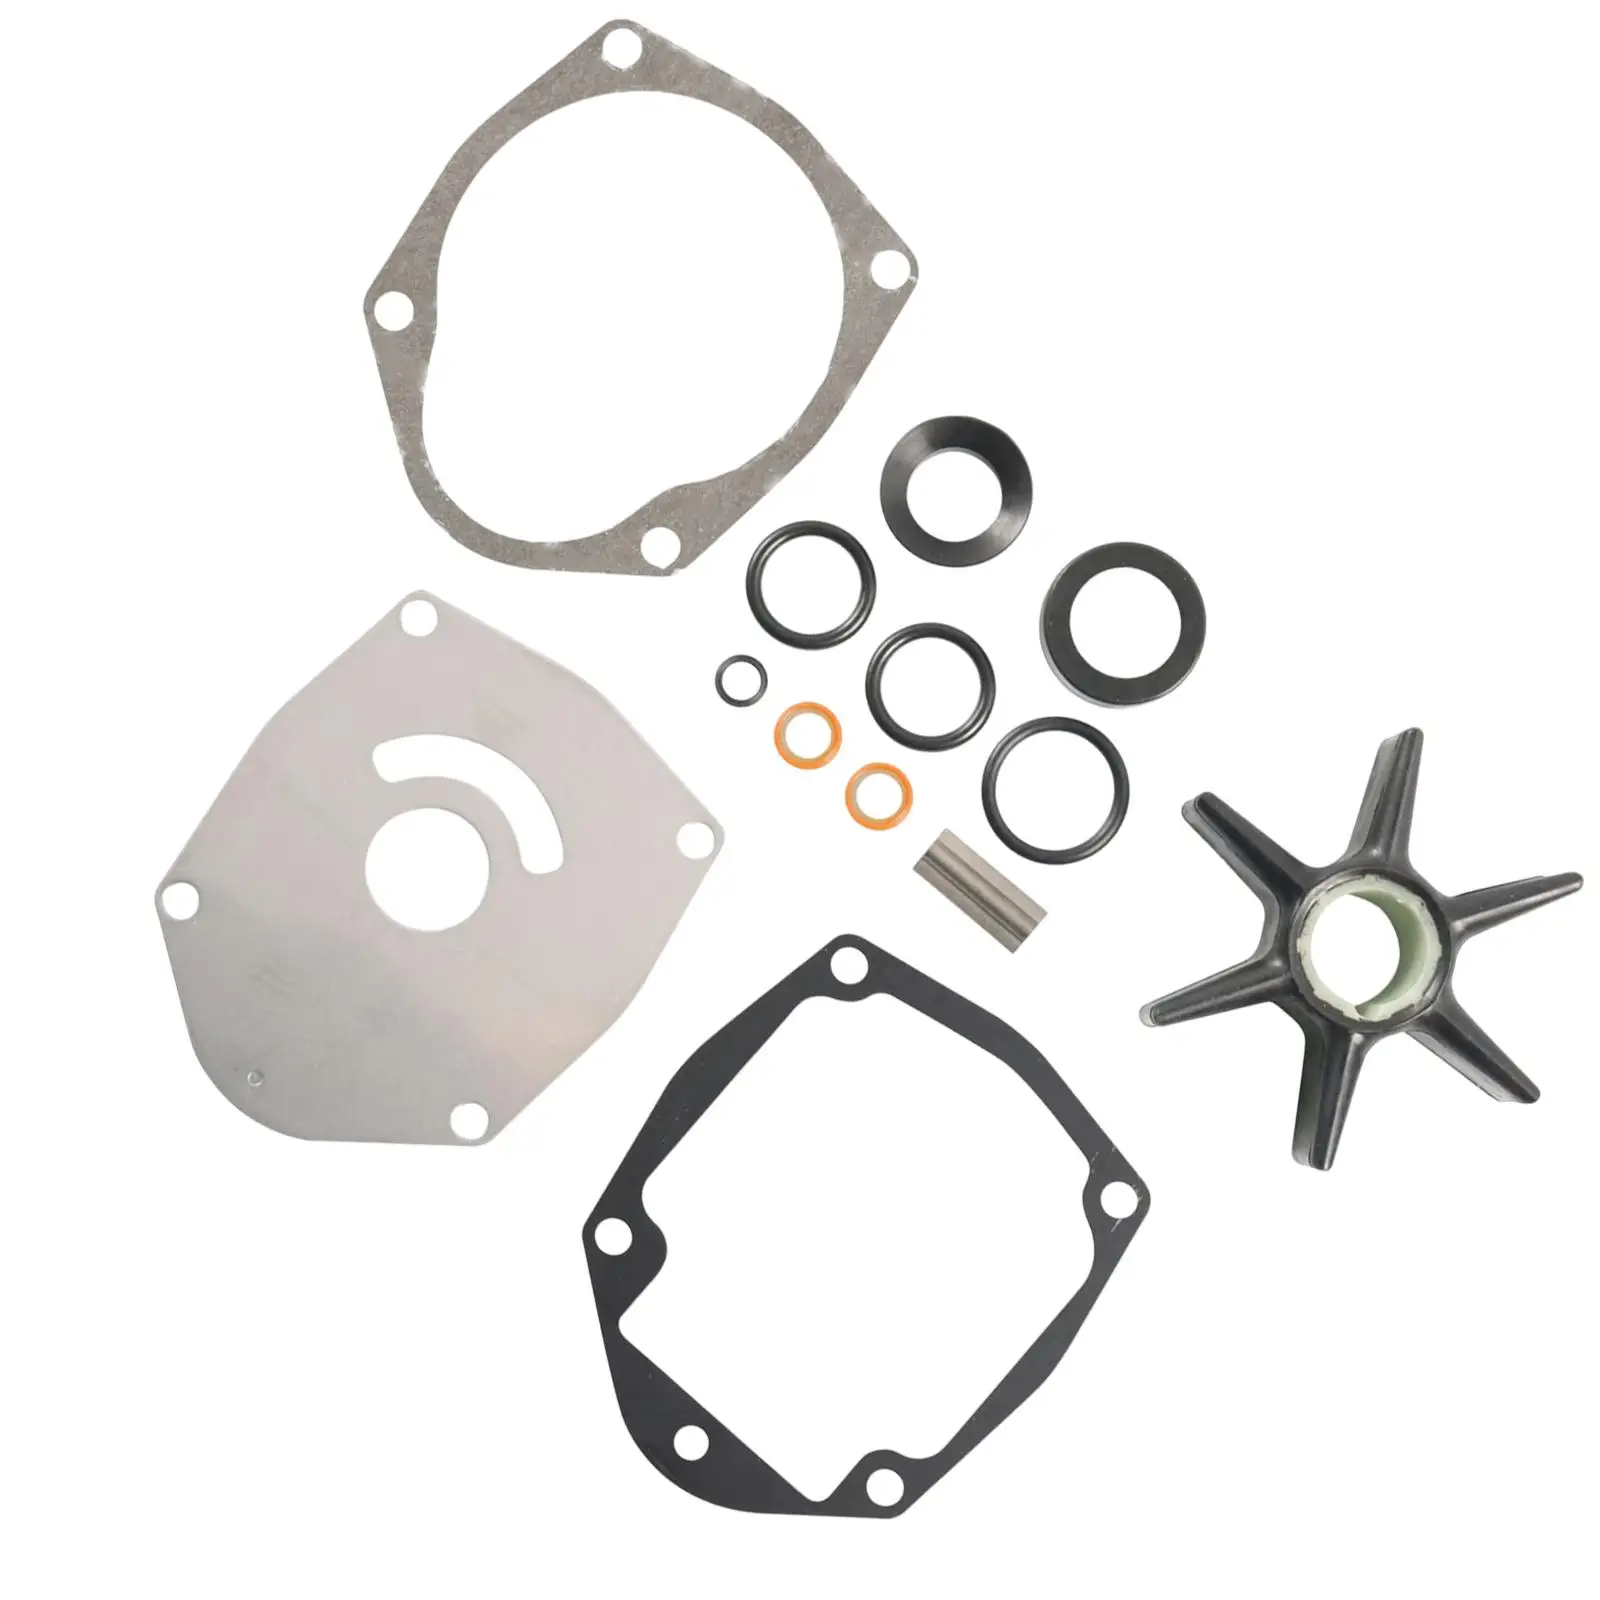 15Pcs Water Pump Impeller Kit 8M0100526 Fit for Mercury Marine Outboard Replacement